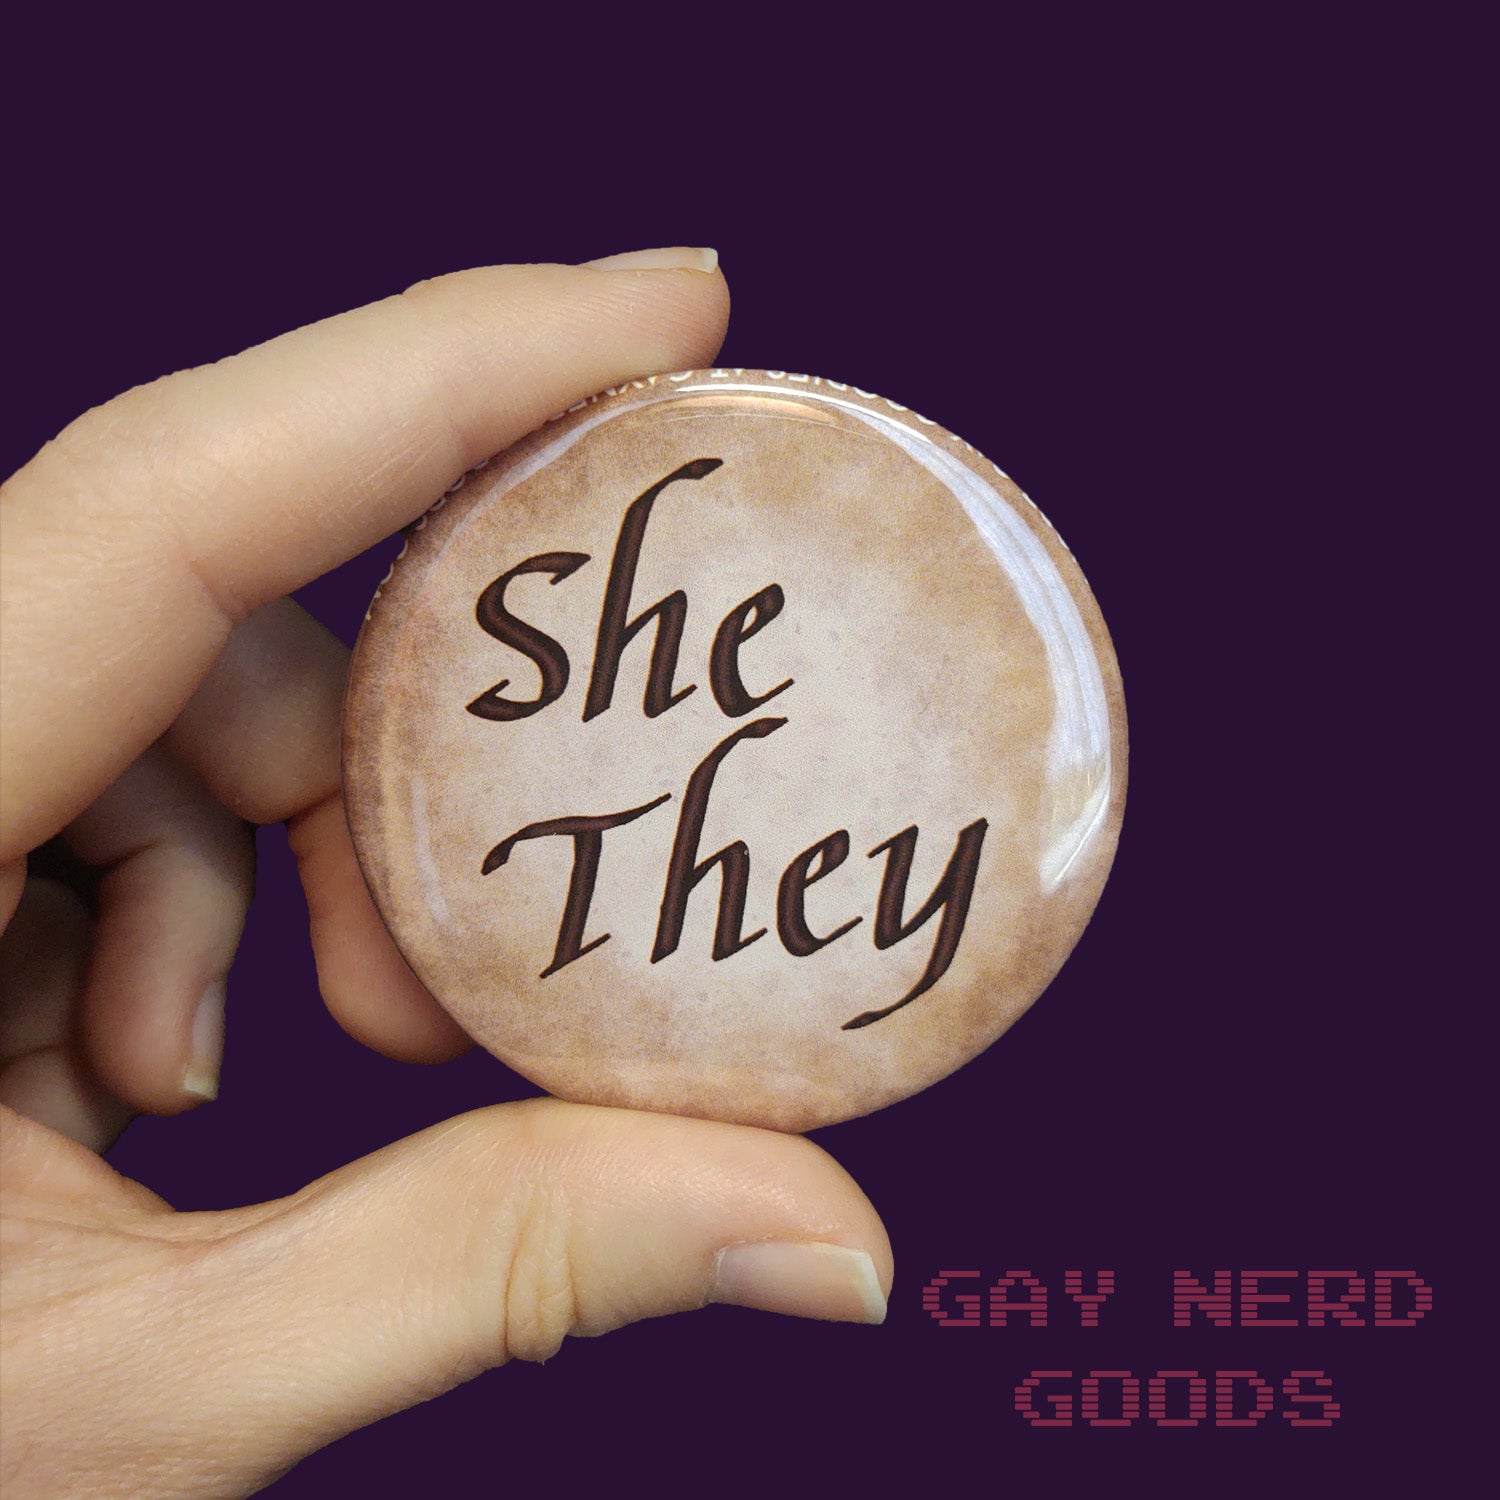 she they large calligraphy pronoun button held in two fingers on a dark purple background